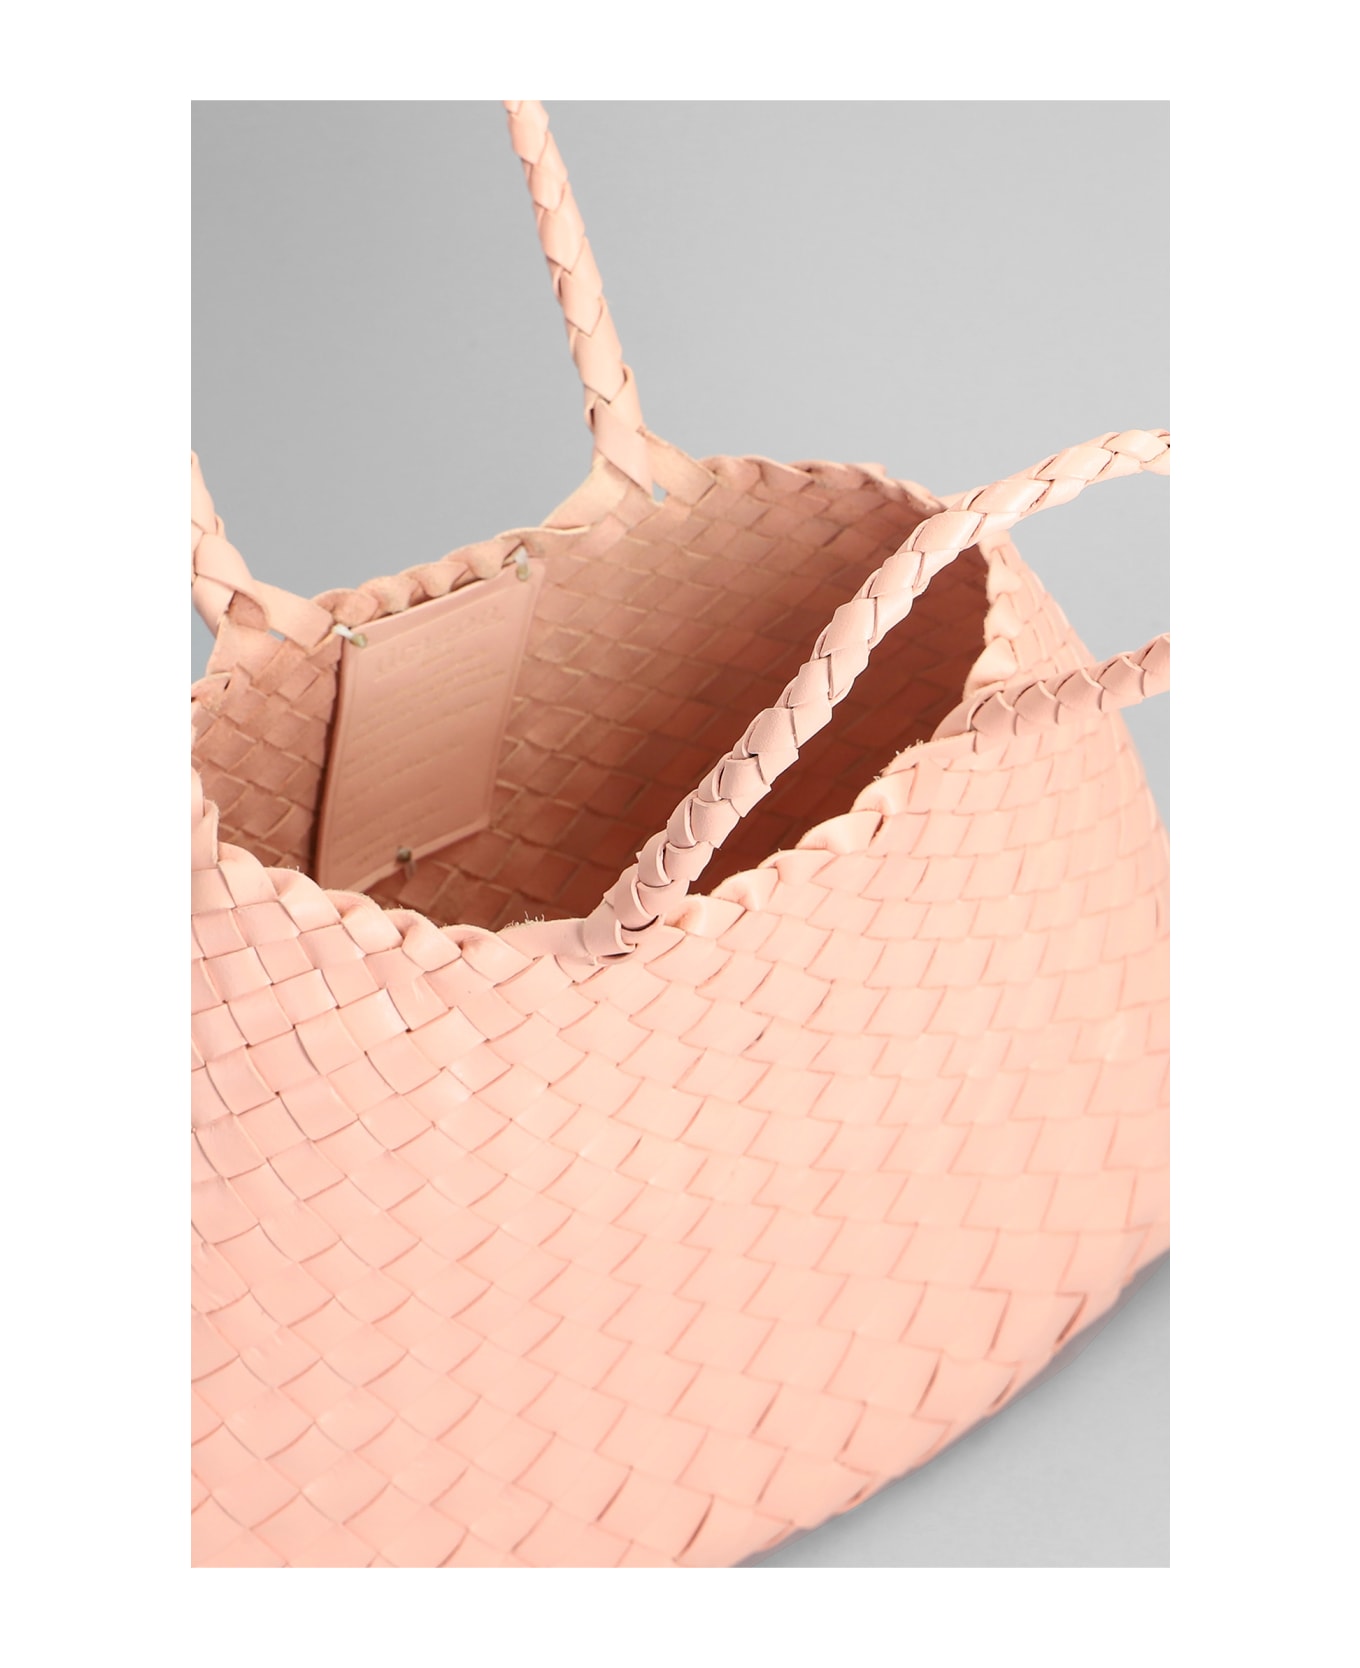 Dragon Diffusion Santa Croce Small Hand Bag In Rose-pink Leather - rose-pink